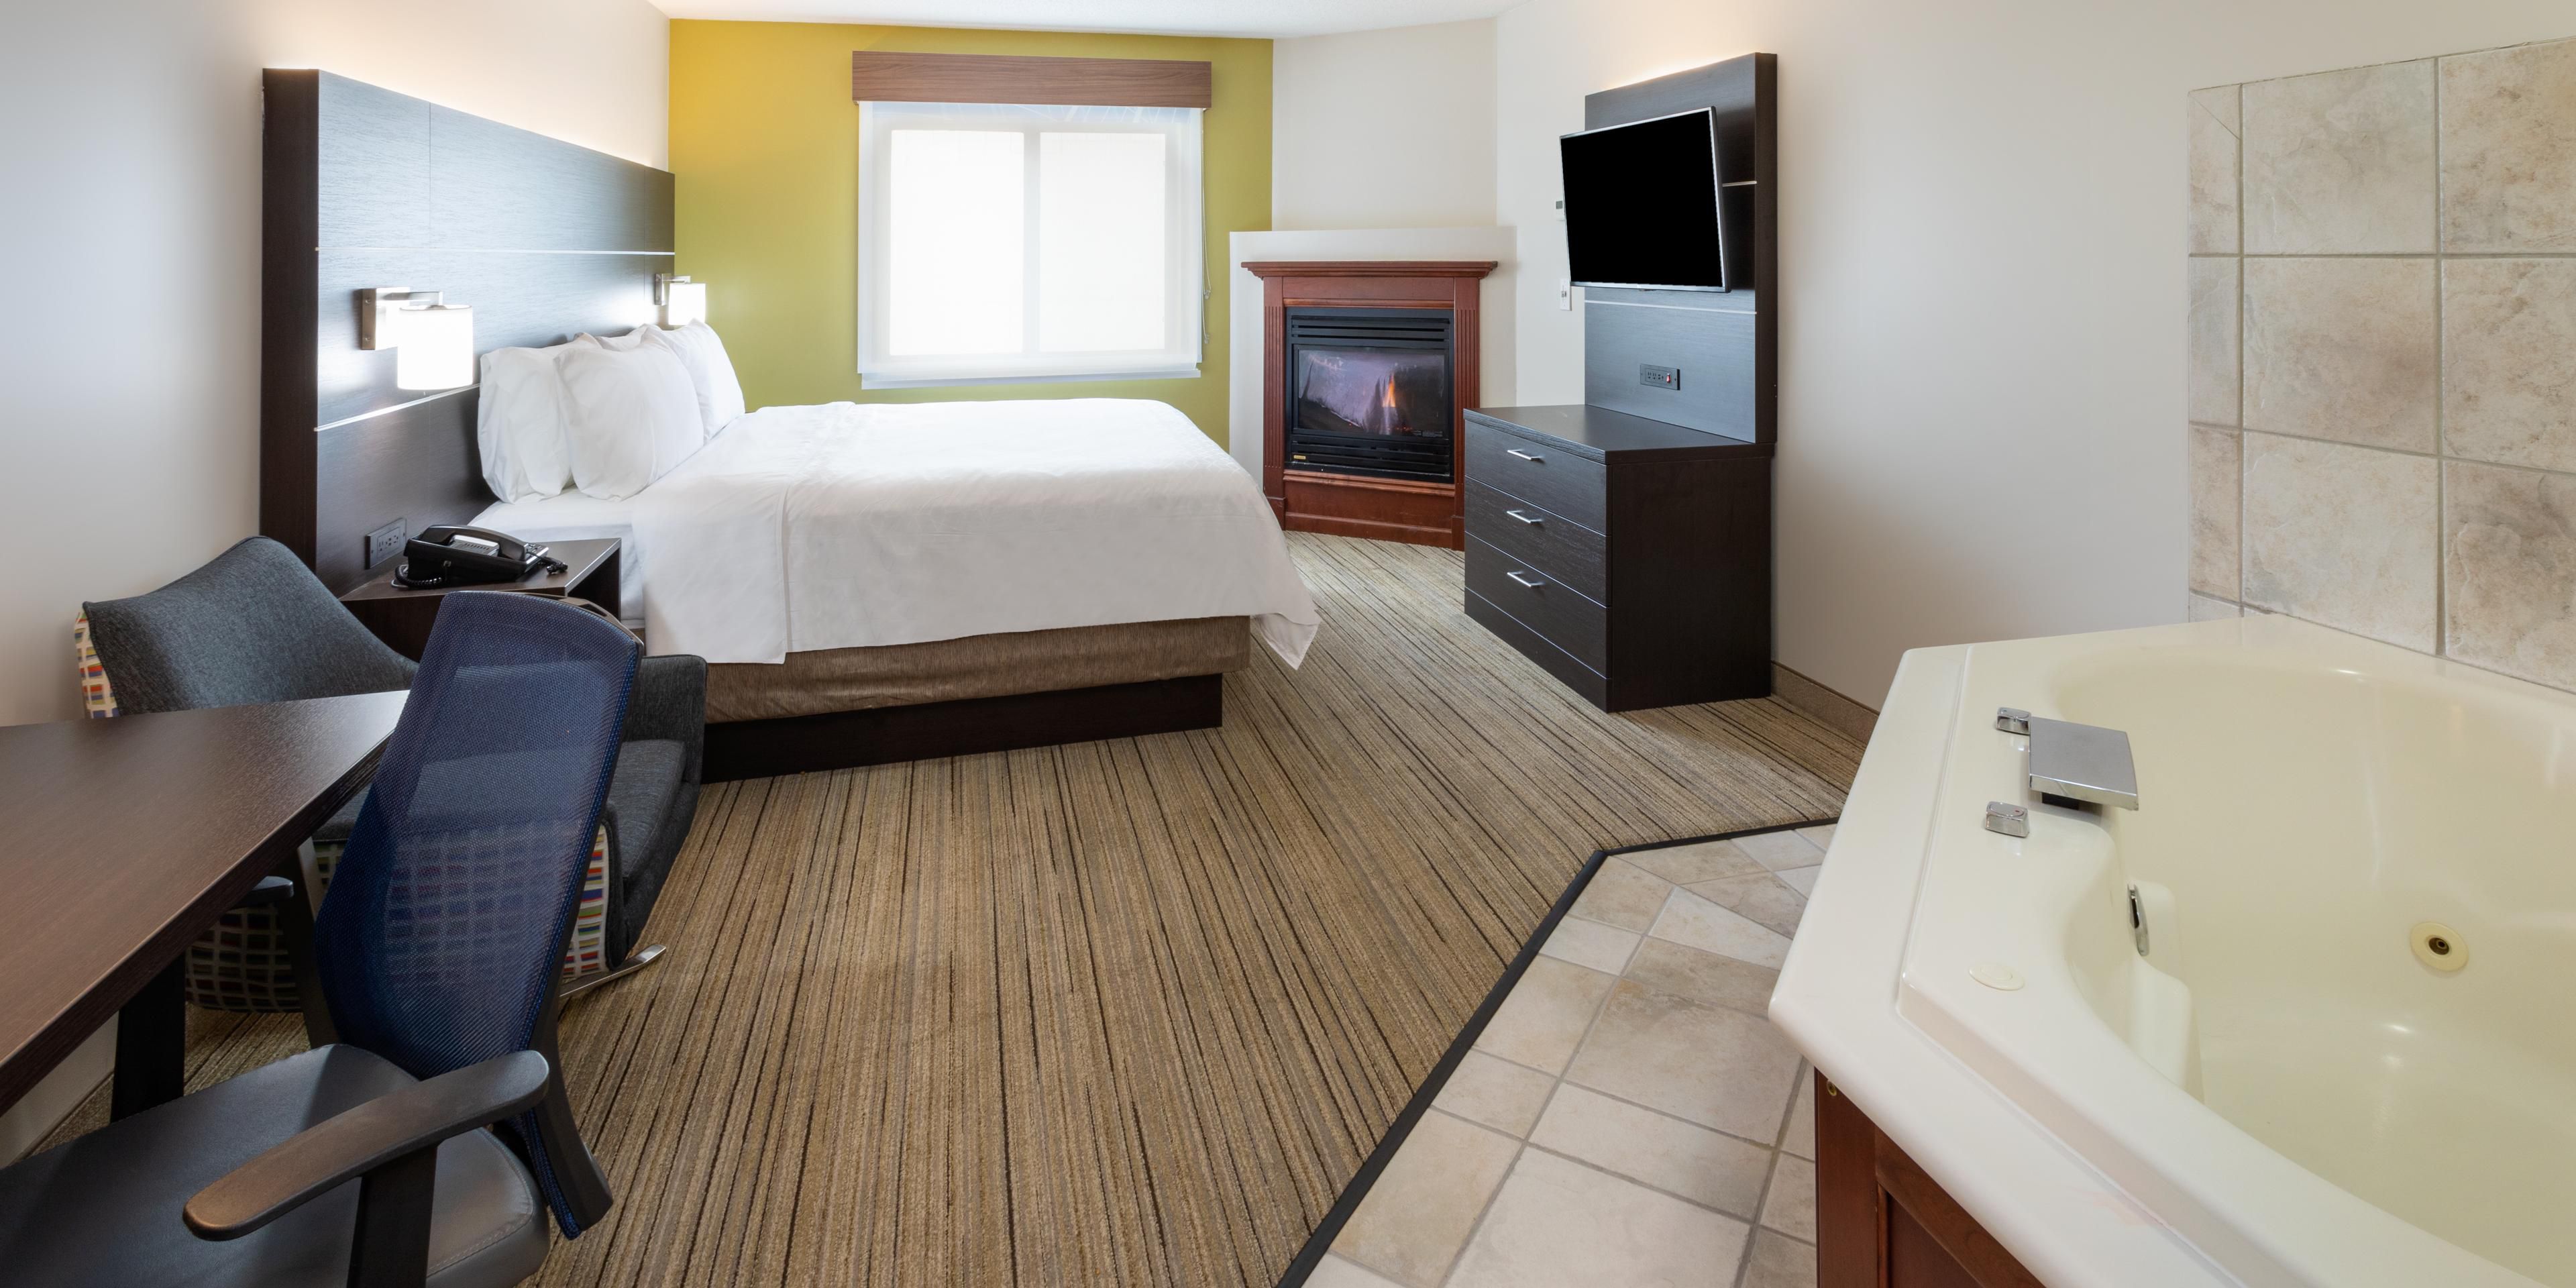 Book a romantic night away in one of our two Whirlpool Fireplace Suites. This room type features a king sized bed, gas fireplace, and a whirlpool hot tub in the room. These rooms are limited to an occupancy of two people only. Please call our front desk for pricing details and to reserve now!